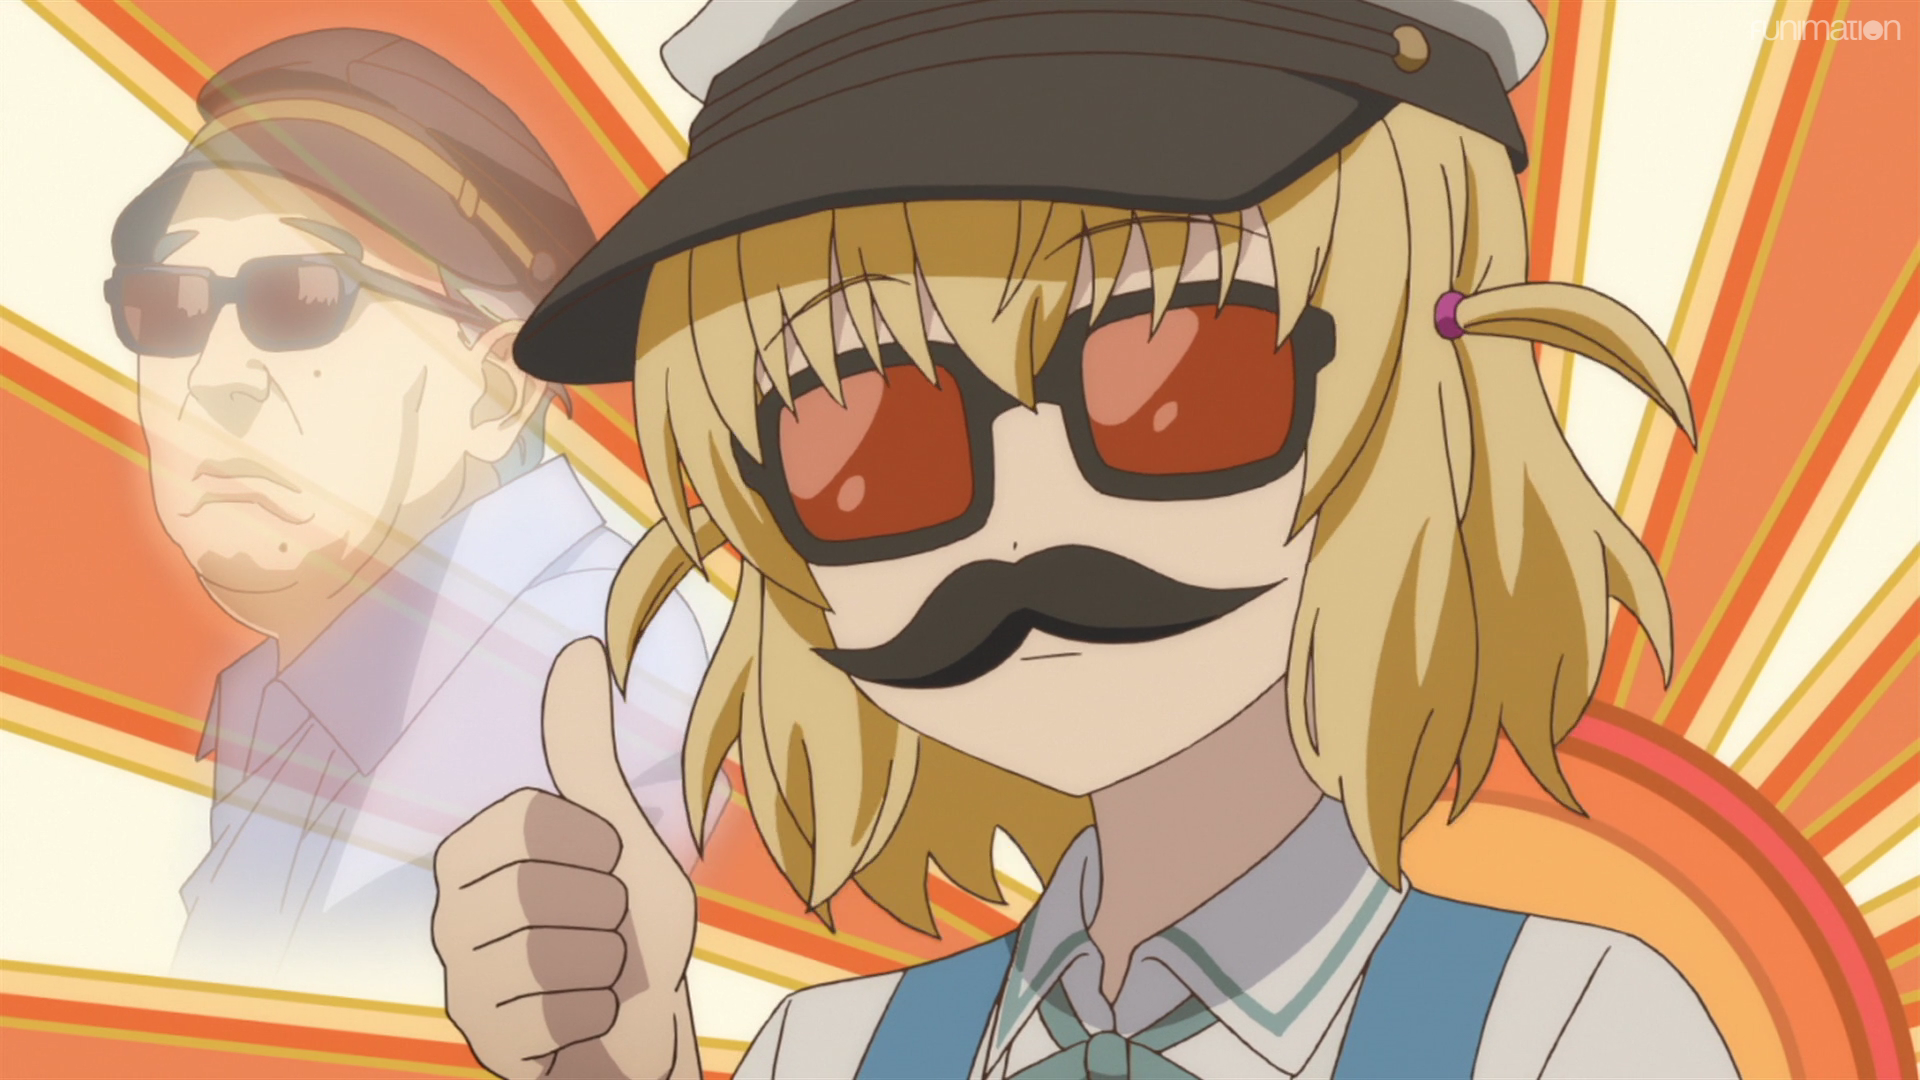 Roka Shibasaki sports a fake mustache, sunglasses, and a hat in her role as director for a culture festival play in a scene from the D-Frag! TV anime.